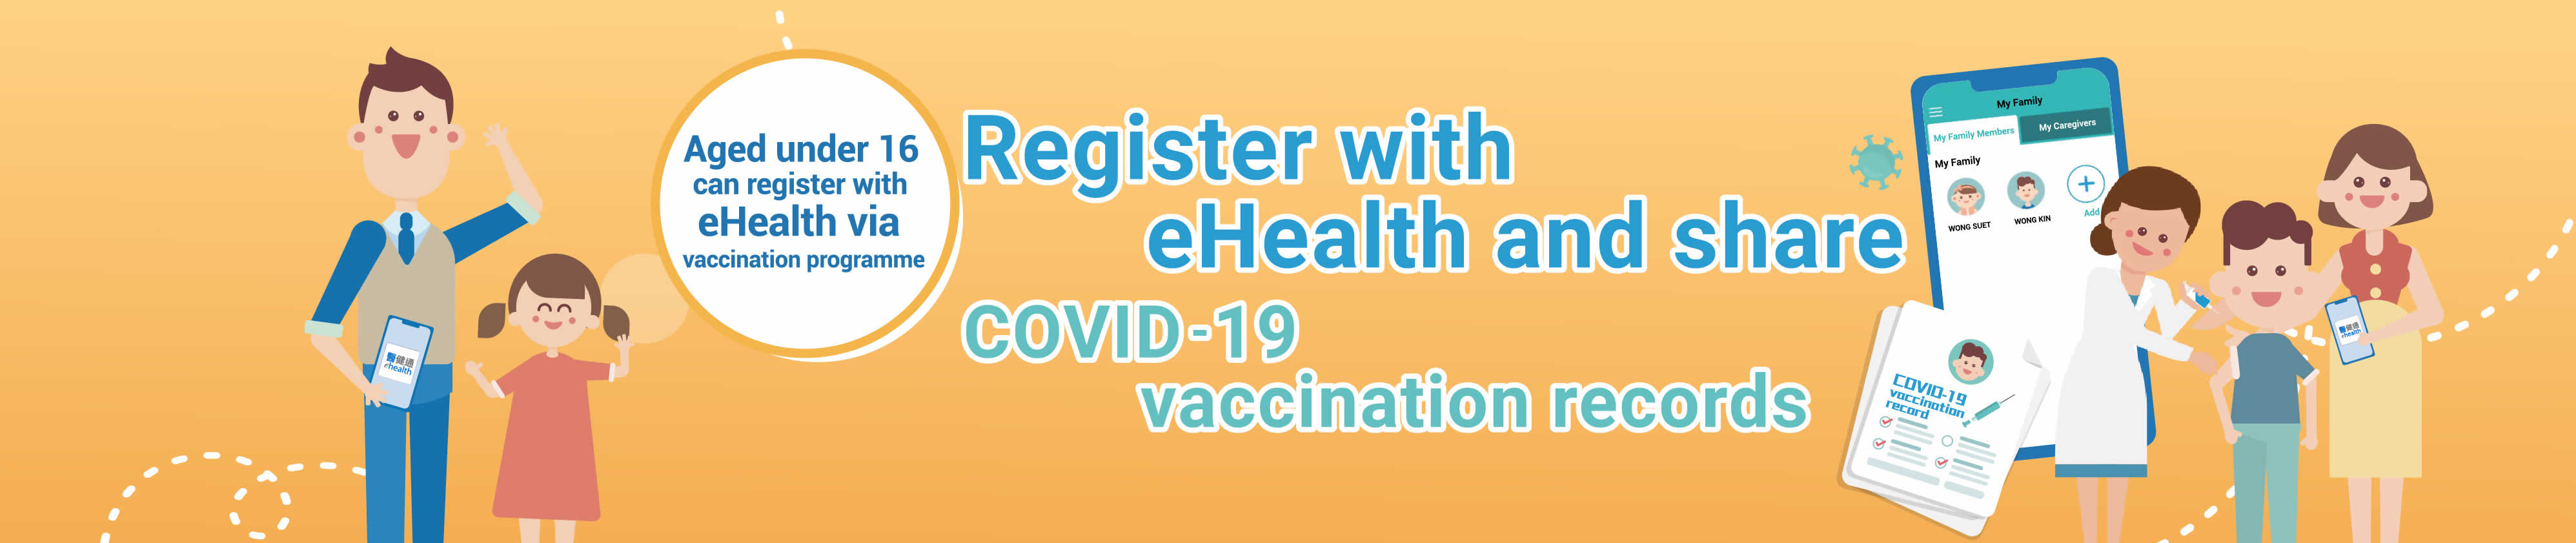 Person aged under 16 can register with eHealth via vaccination programme